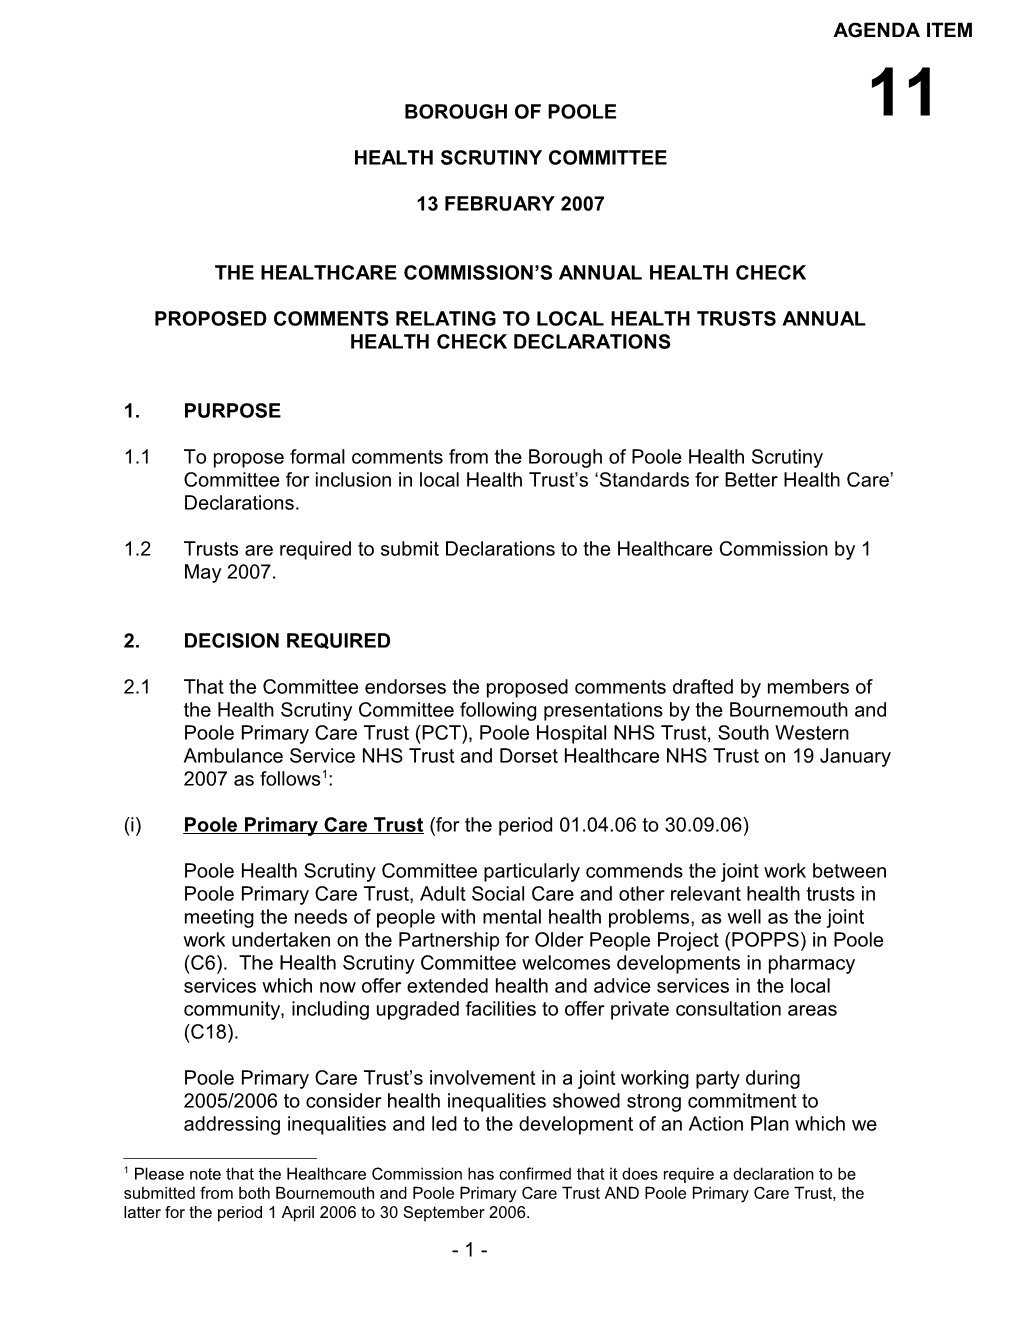 Proposed Comments Relating to Local Health Trusts Annual Health Check Declarations